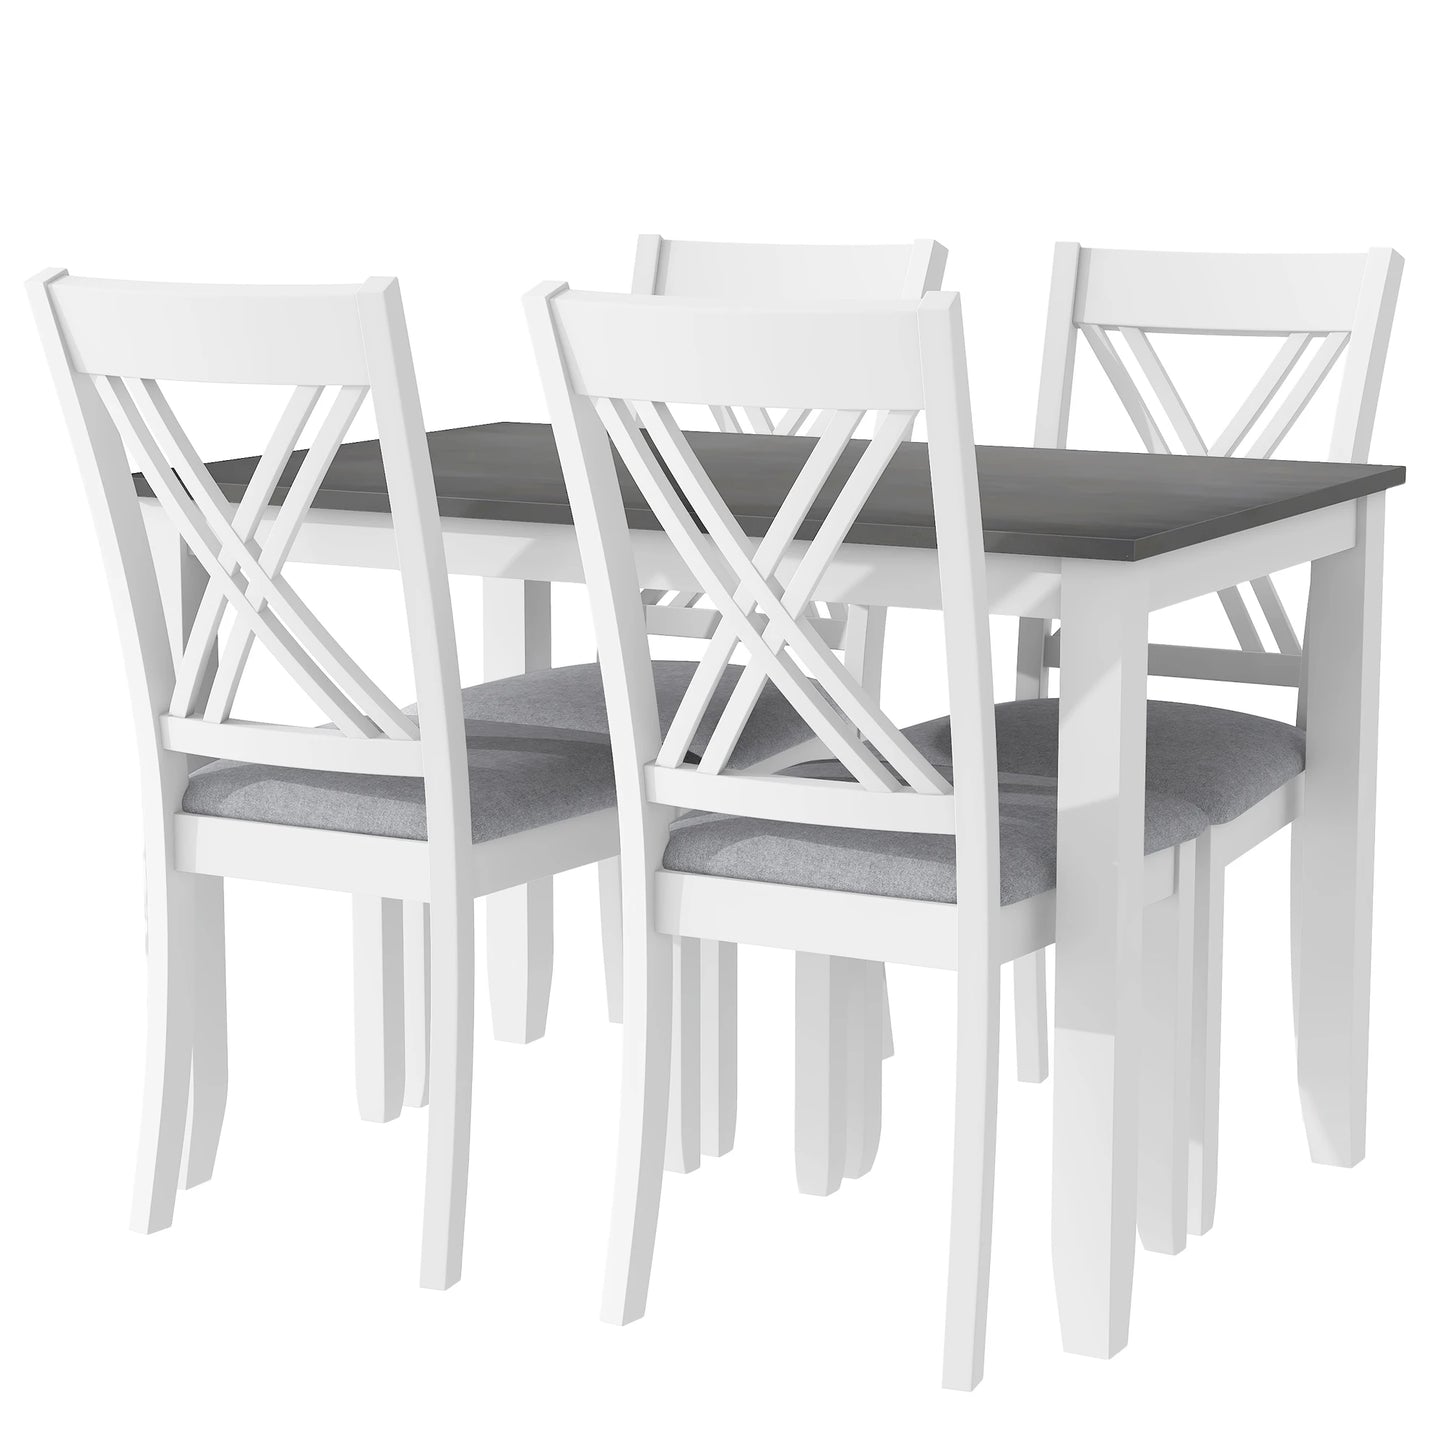 Chic Rustic Minimalist Wood 5-Piece Dining Table Set with 4 X-Back Chairs - Perfect for Small Spaces ShopOnlyDeal